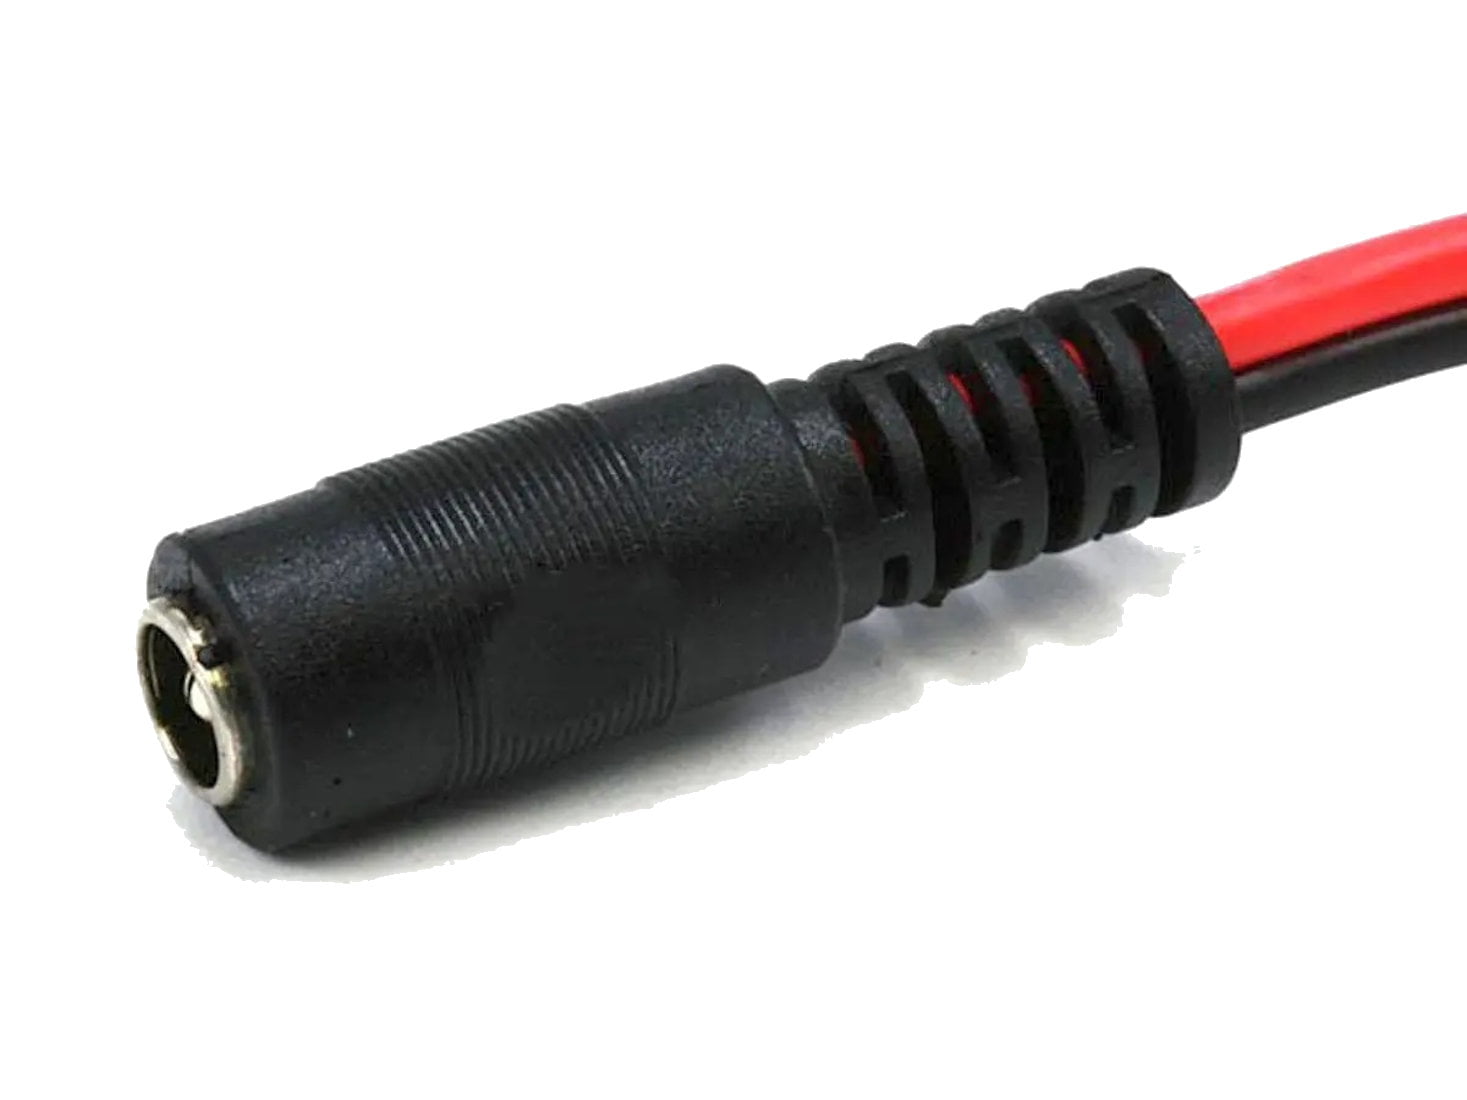 TR-PIGTAIL-F DC 2.1 × 5.5mm Female Power Plug Pigtail for CCTV Security Systems. Plug